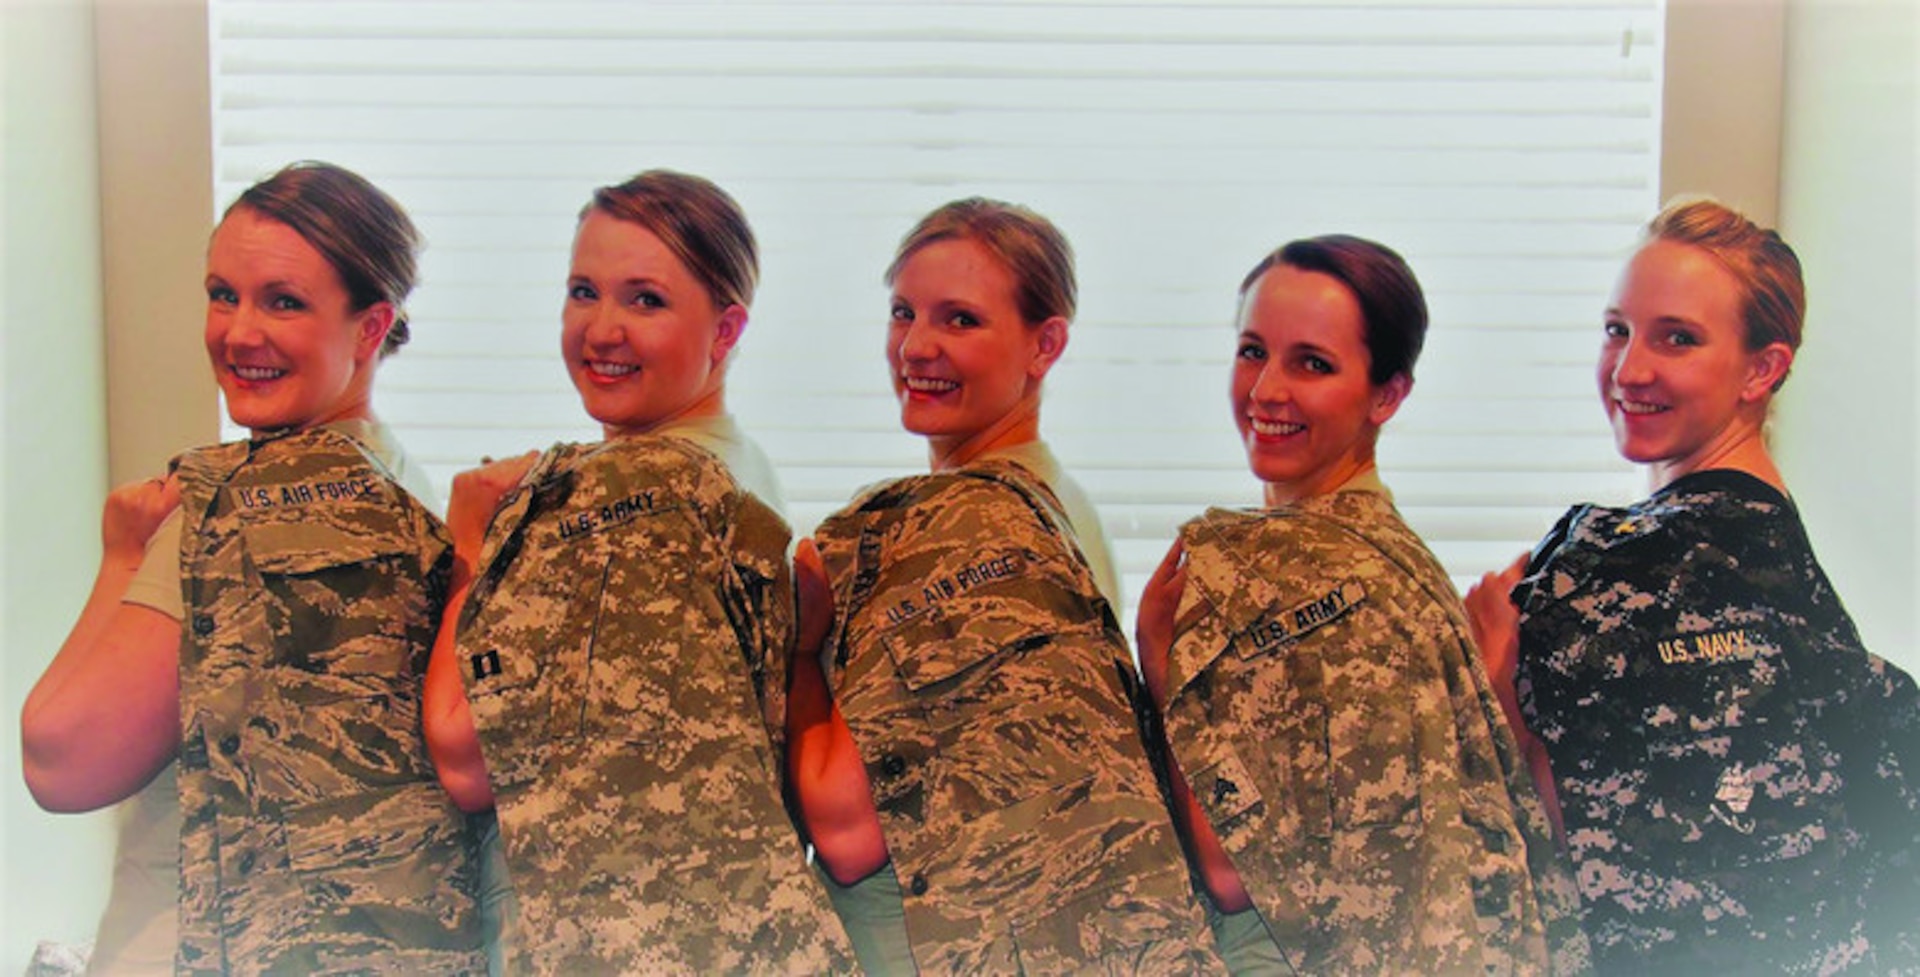 The five Puro sisters of Utah took different paths to military careers. Left to right: Tiara, Air Force; Tambra, Army Guard, Tayva, Air Guard; Ty'lene, Army Guard; Taryn, Navy.